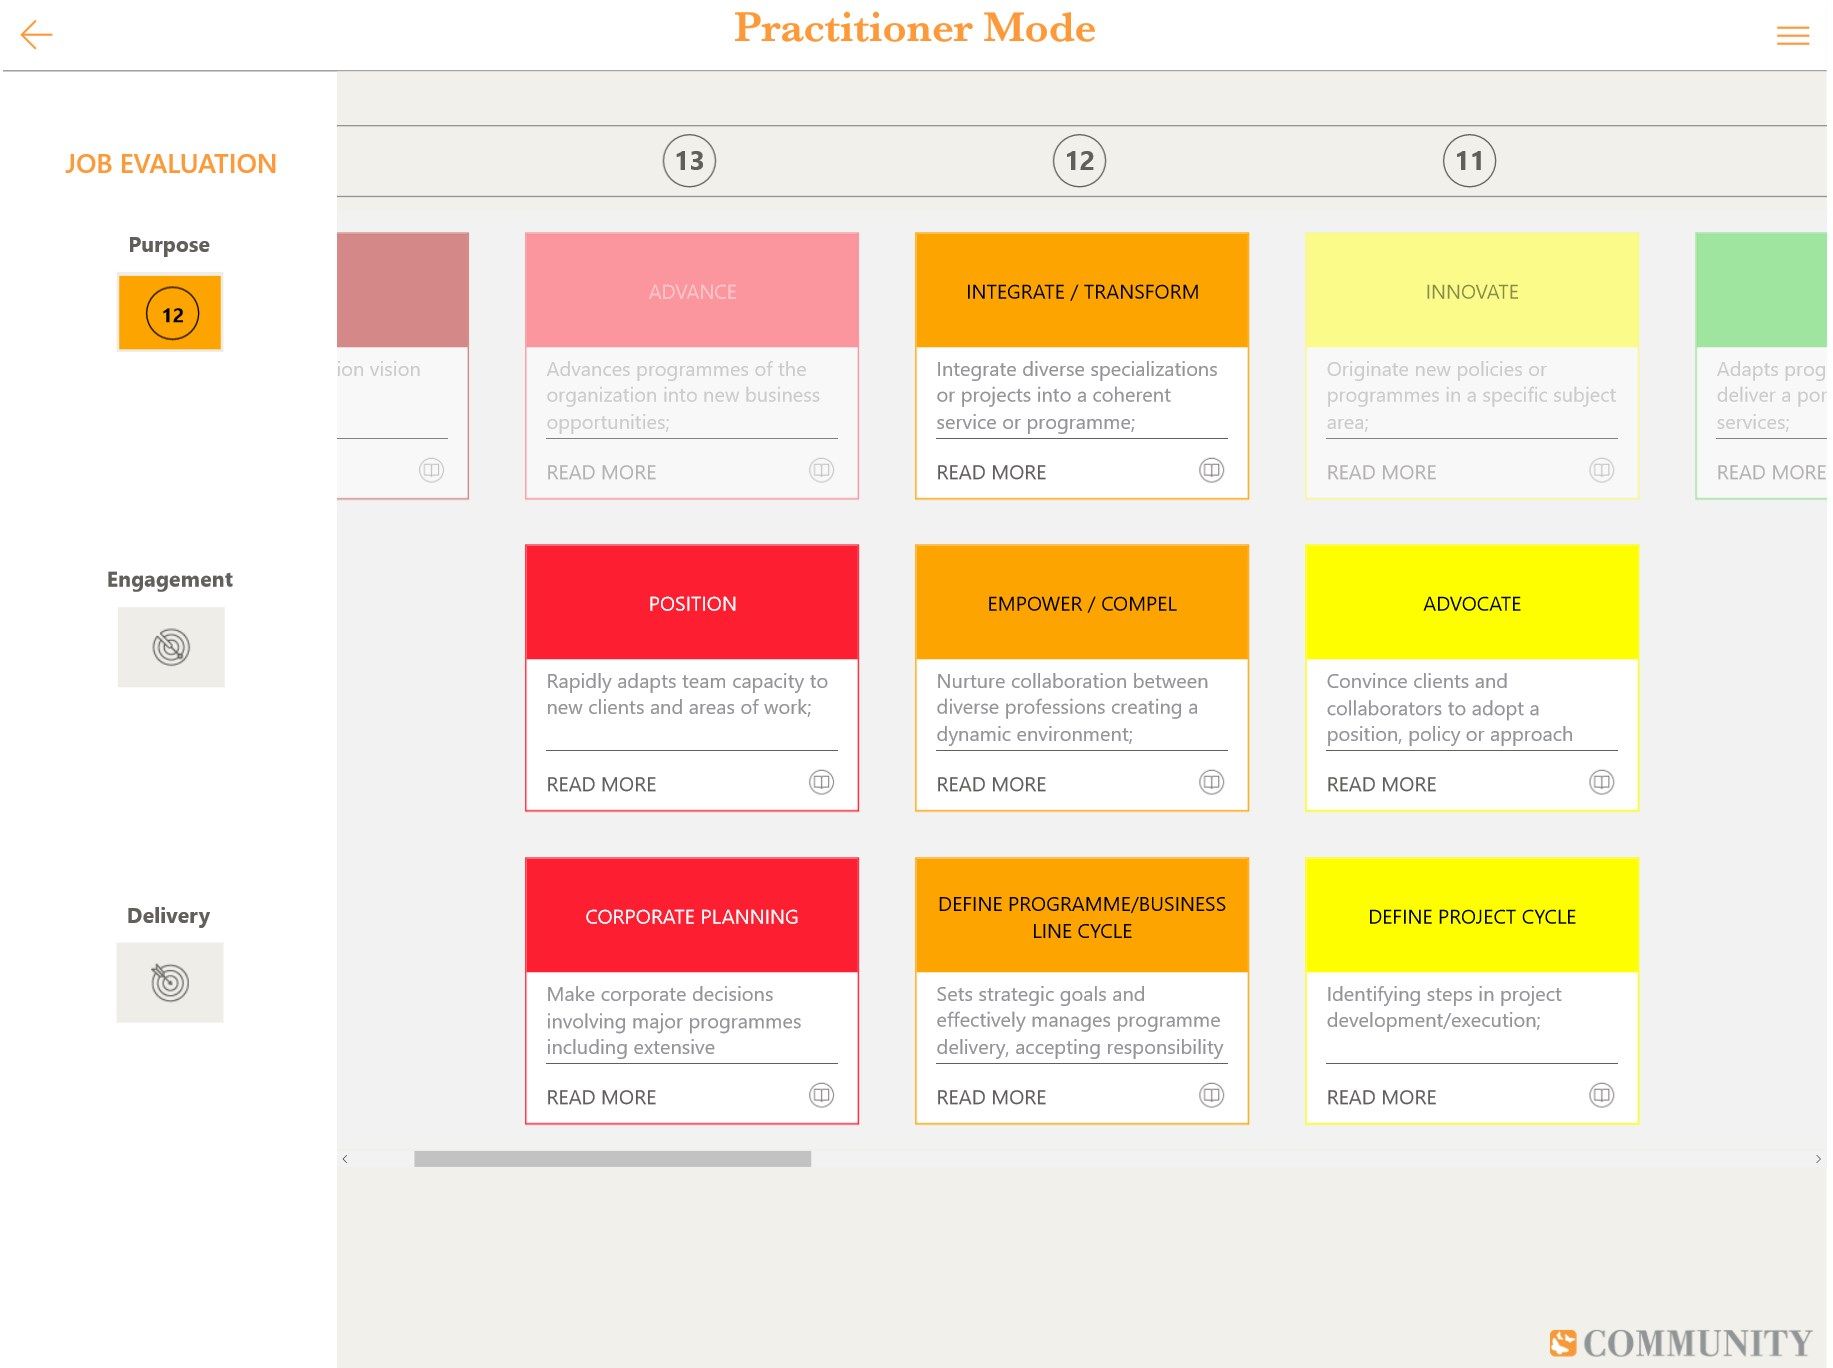 Practitioner mode provides a full overview and allows for quick selections of values.